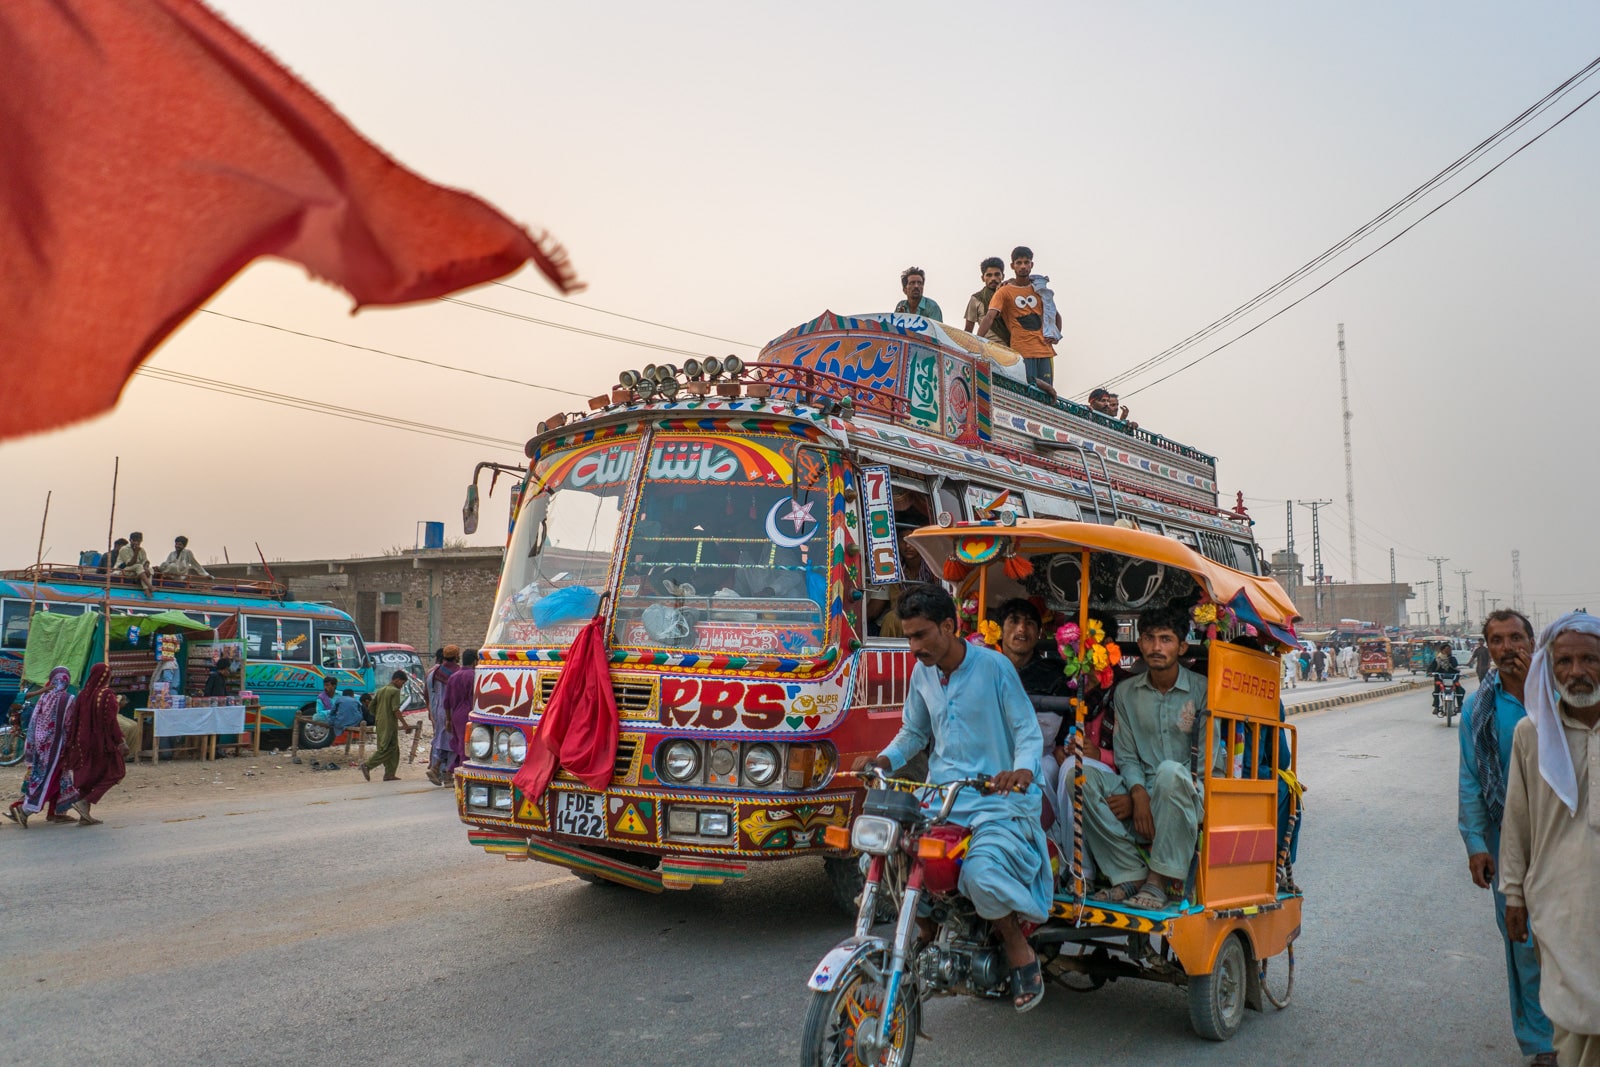 A rickshaw and a local bus transporting people in Pakistan